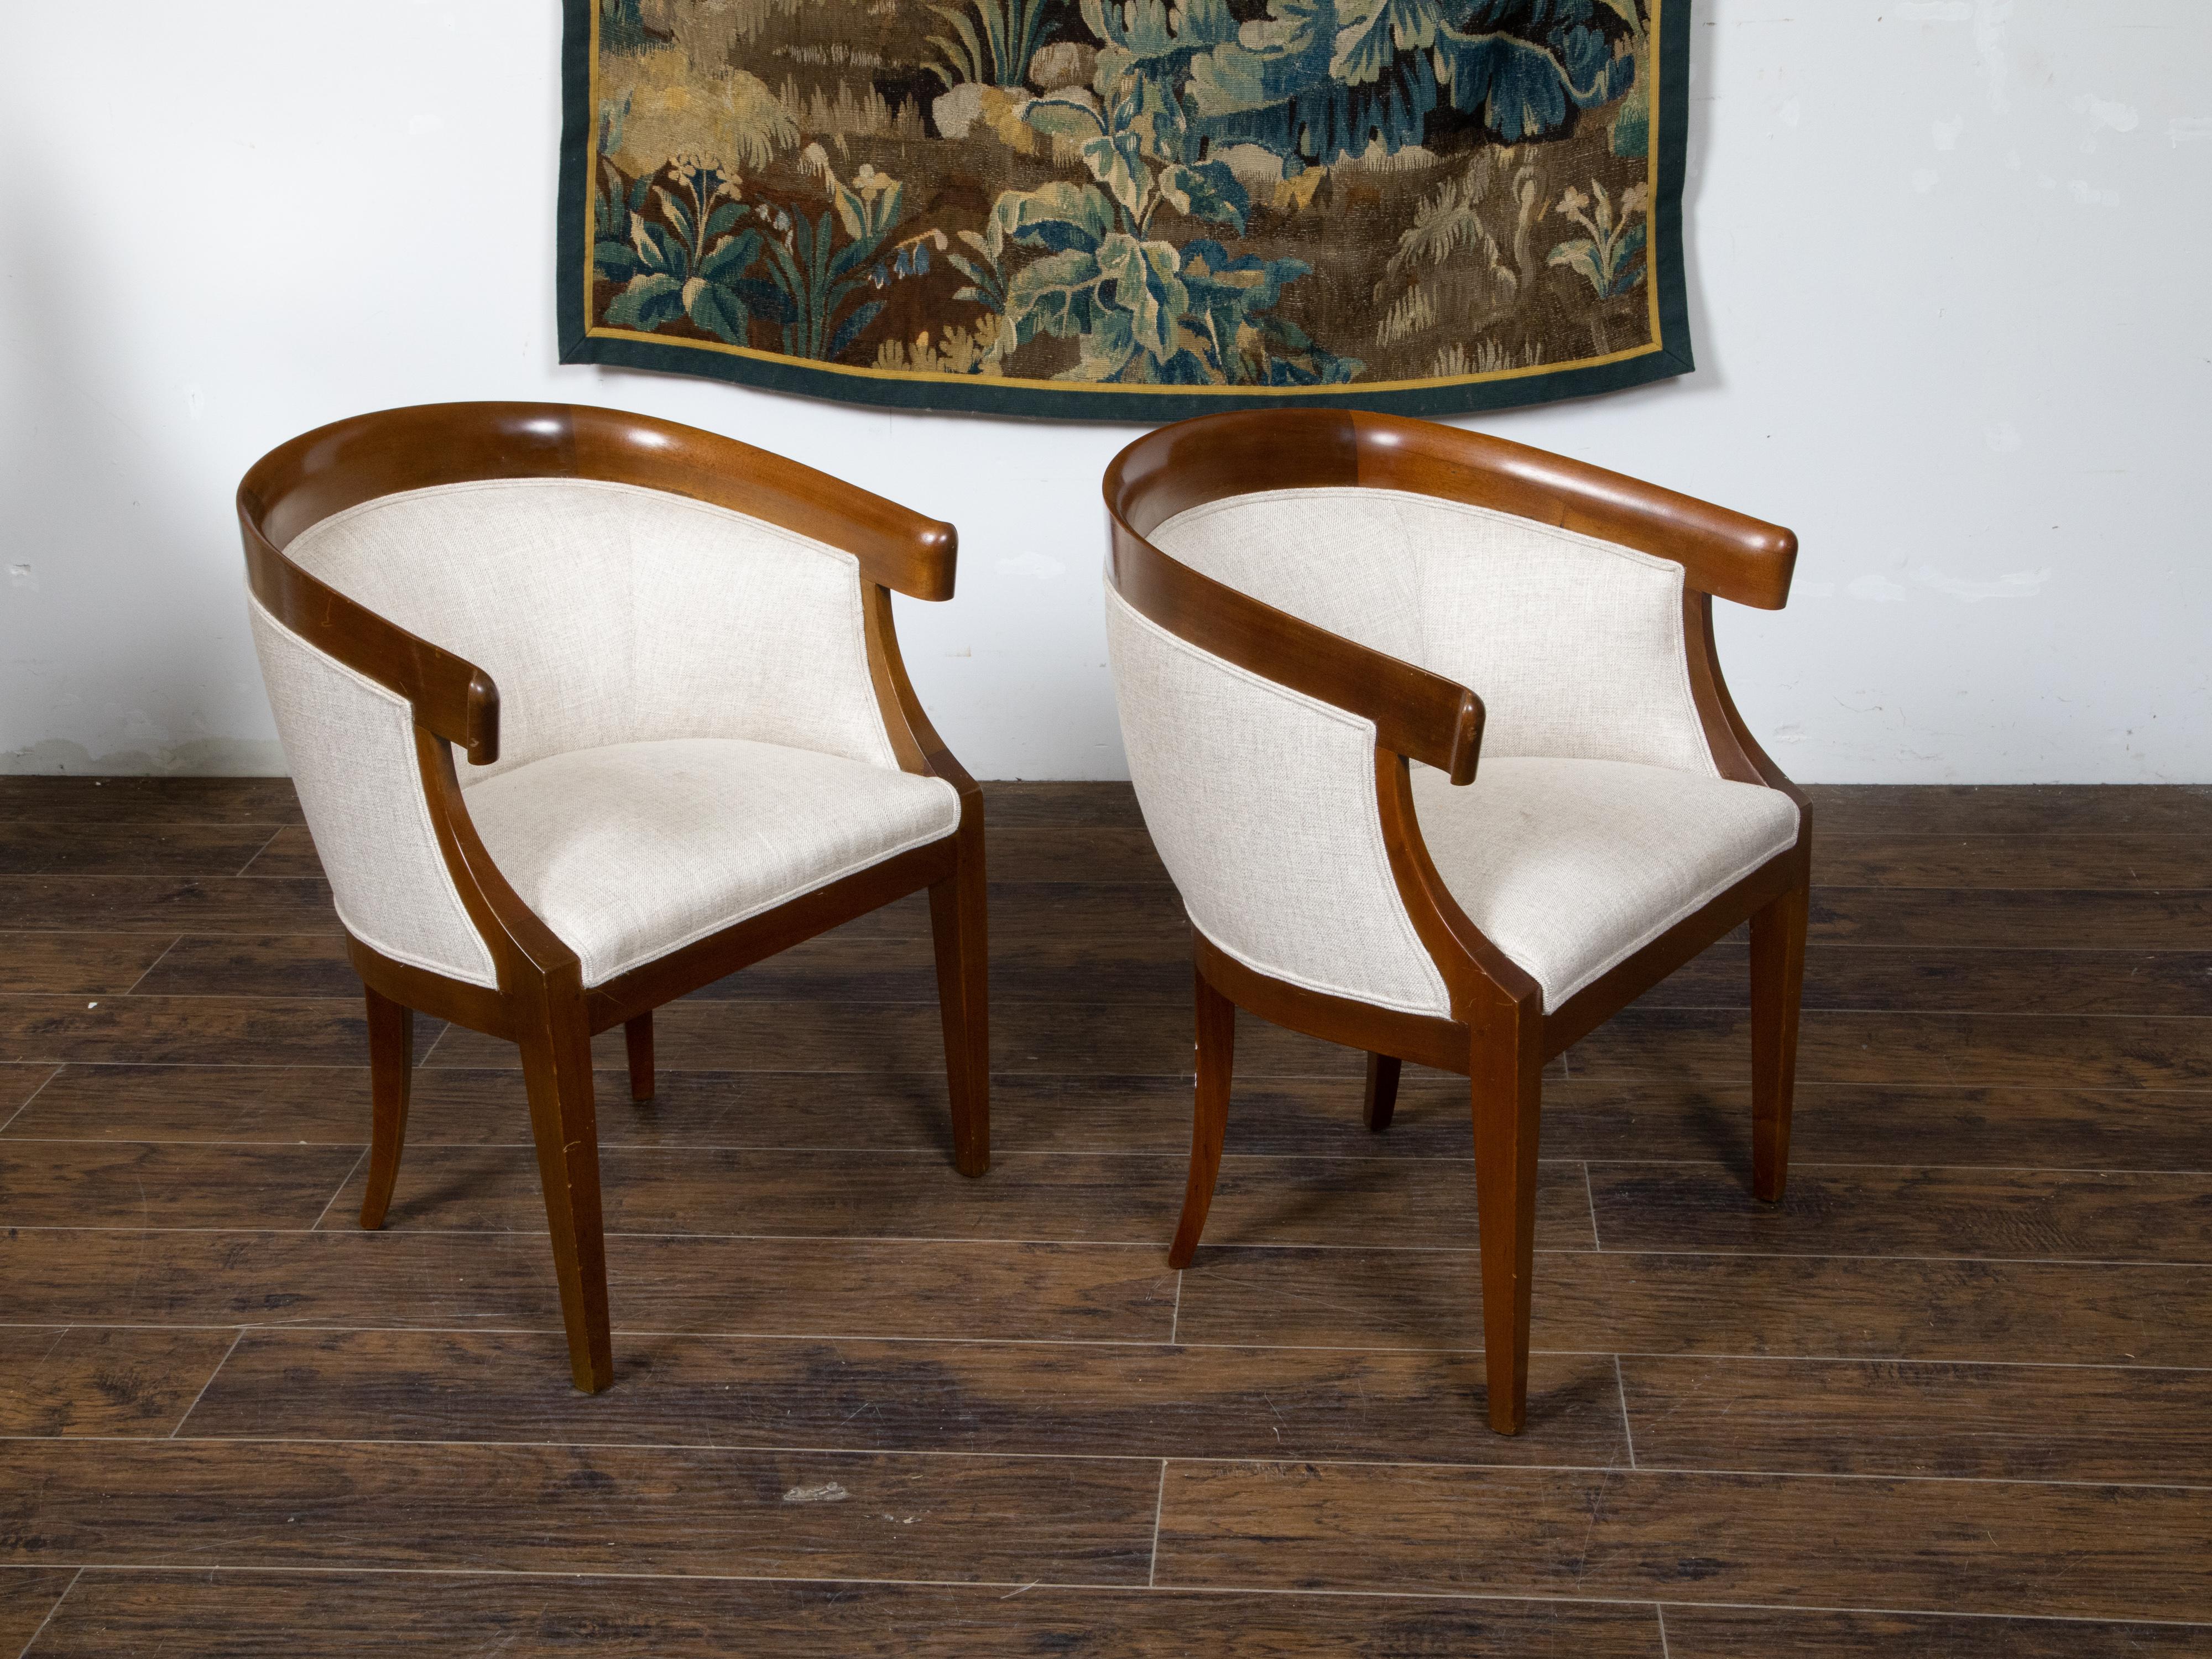 Pair of French Art Deco Period 1930s Walnut Horseshoe Back Upholstered Armchairs For Sale 3